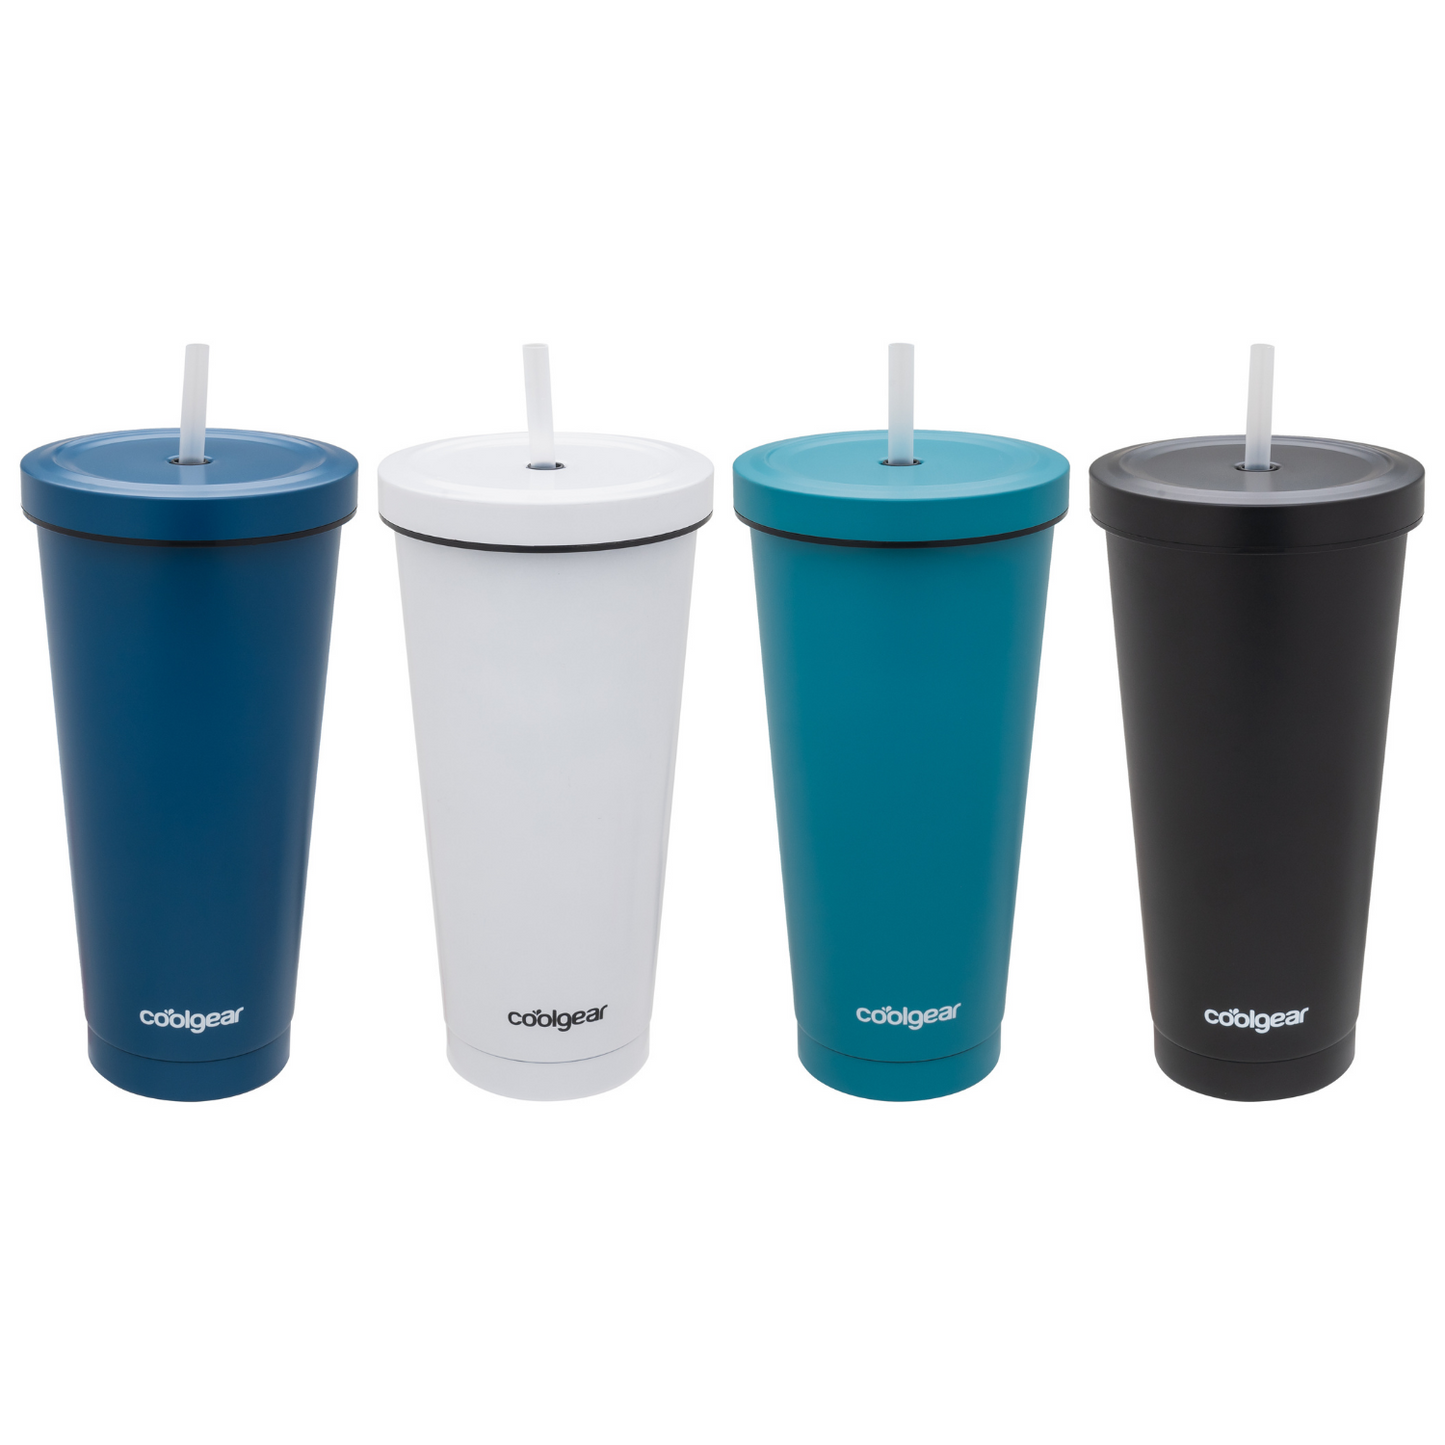 Cool Gear 4-Pack 25 oz Tauton Insulated Stainless Steel Chillers with Twist Top and Reusable Straw | Eco Friendly Travel Tumbler for Home, Work, Gym & More | Keep Drinks Cold For Hours